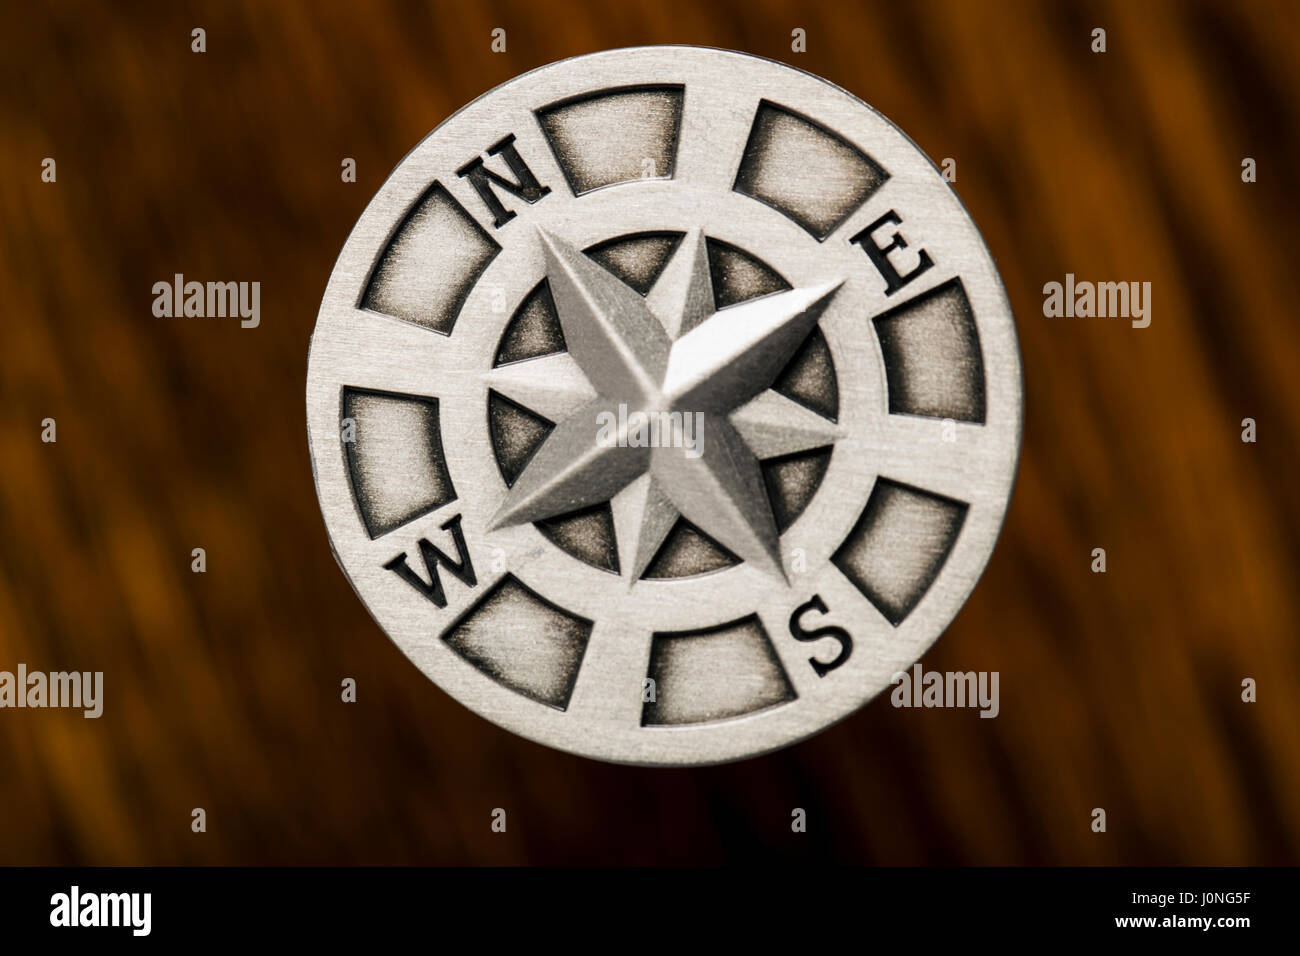 Simple graphic object of a navigational compass rose Stock Photo